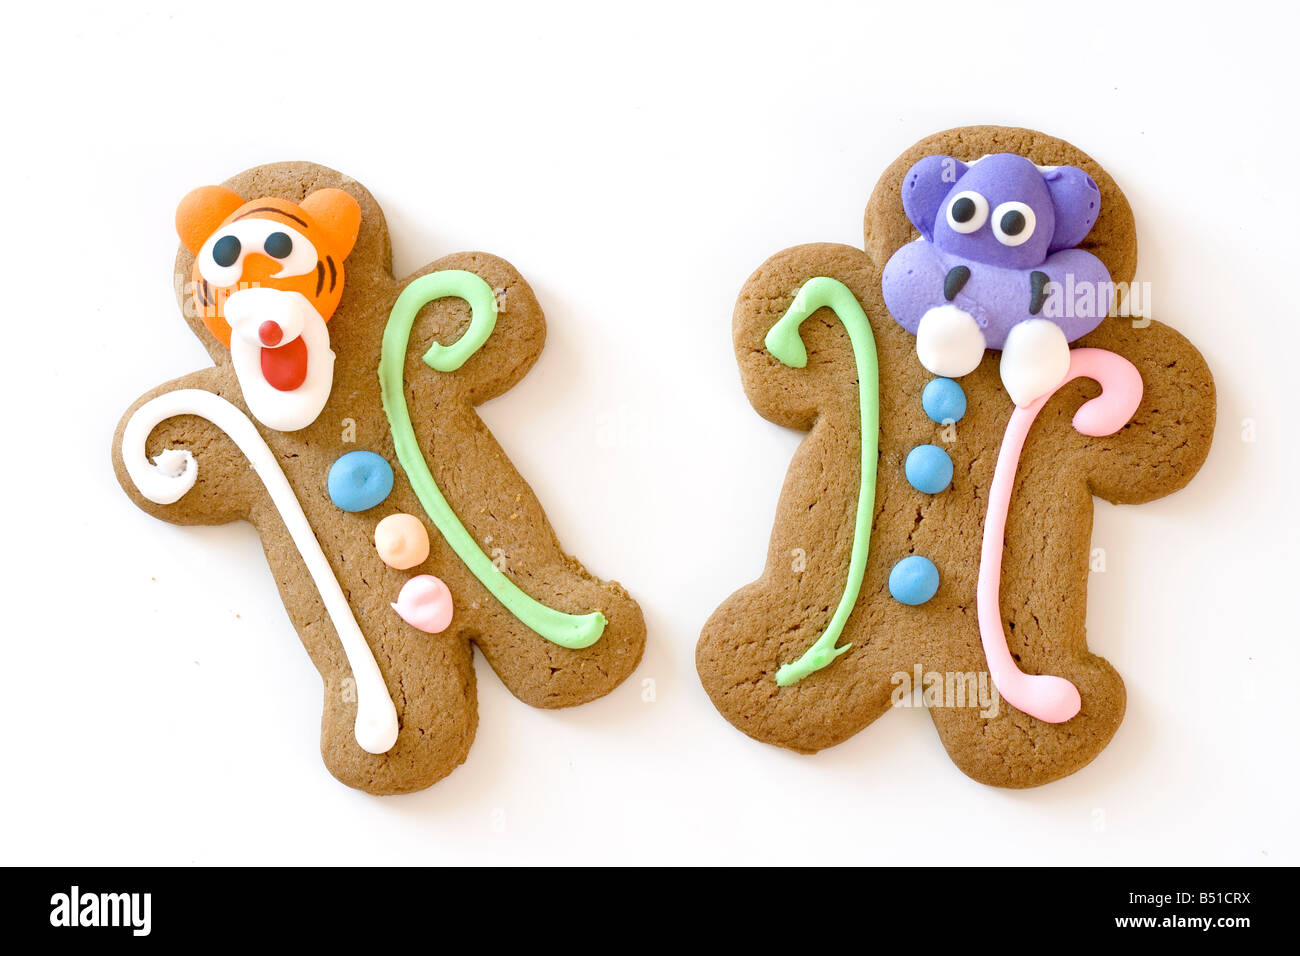 two gingerbread characters Stock Photo